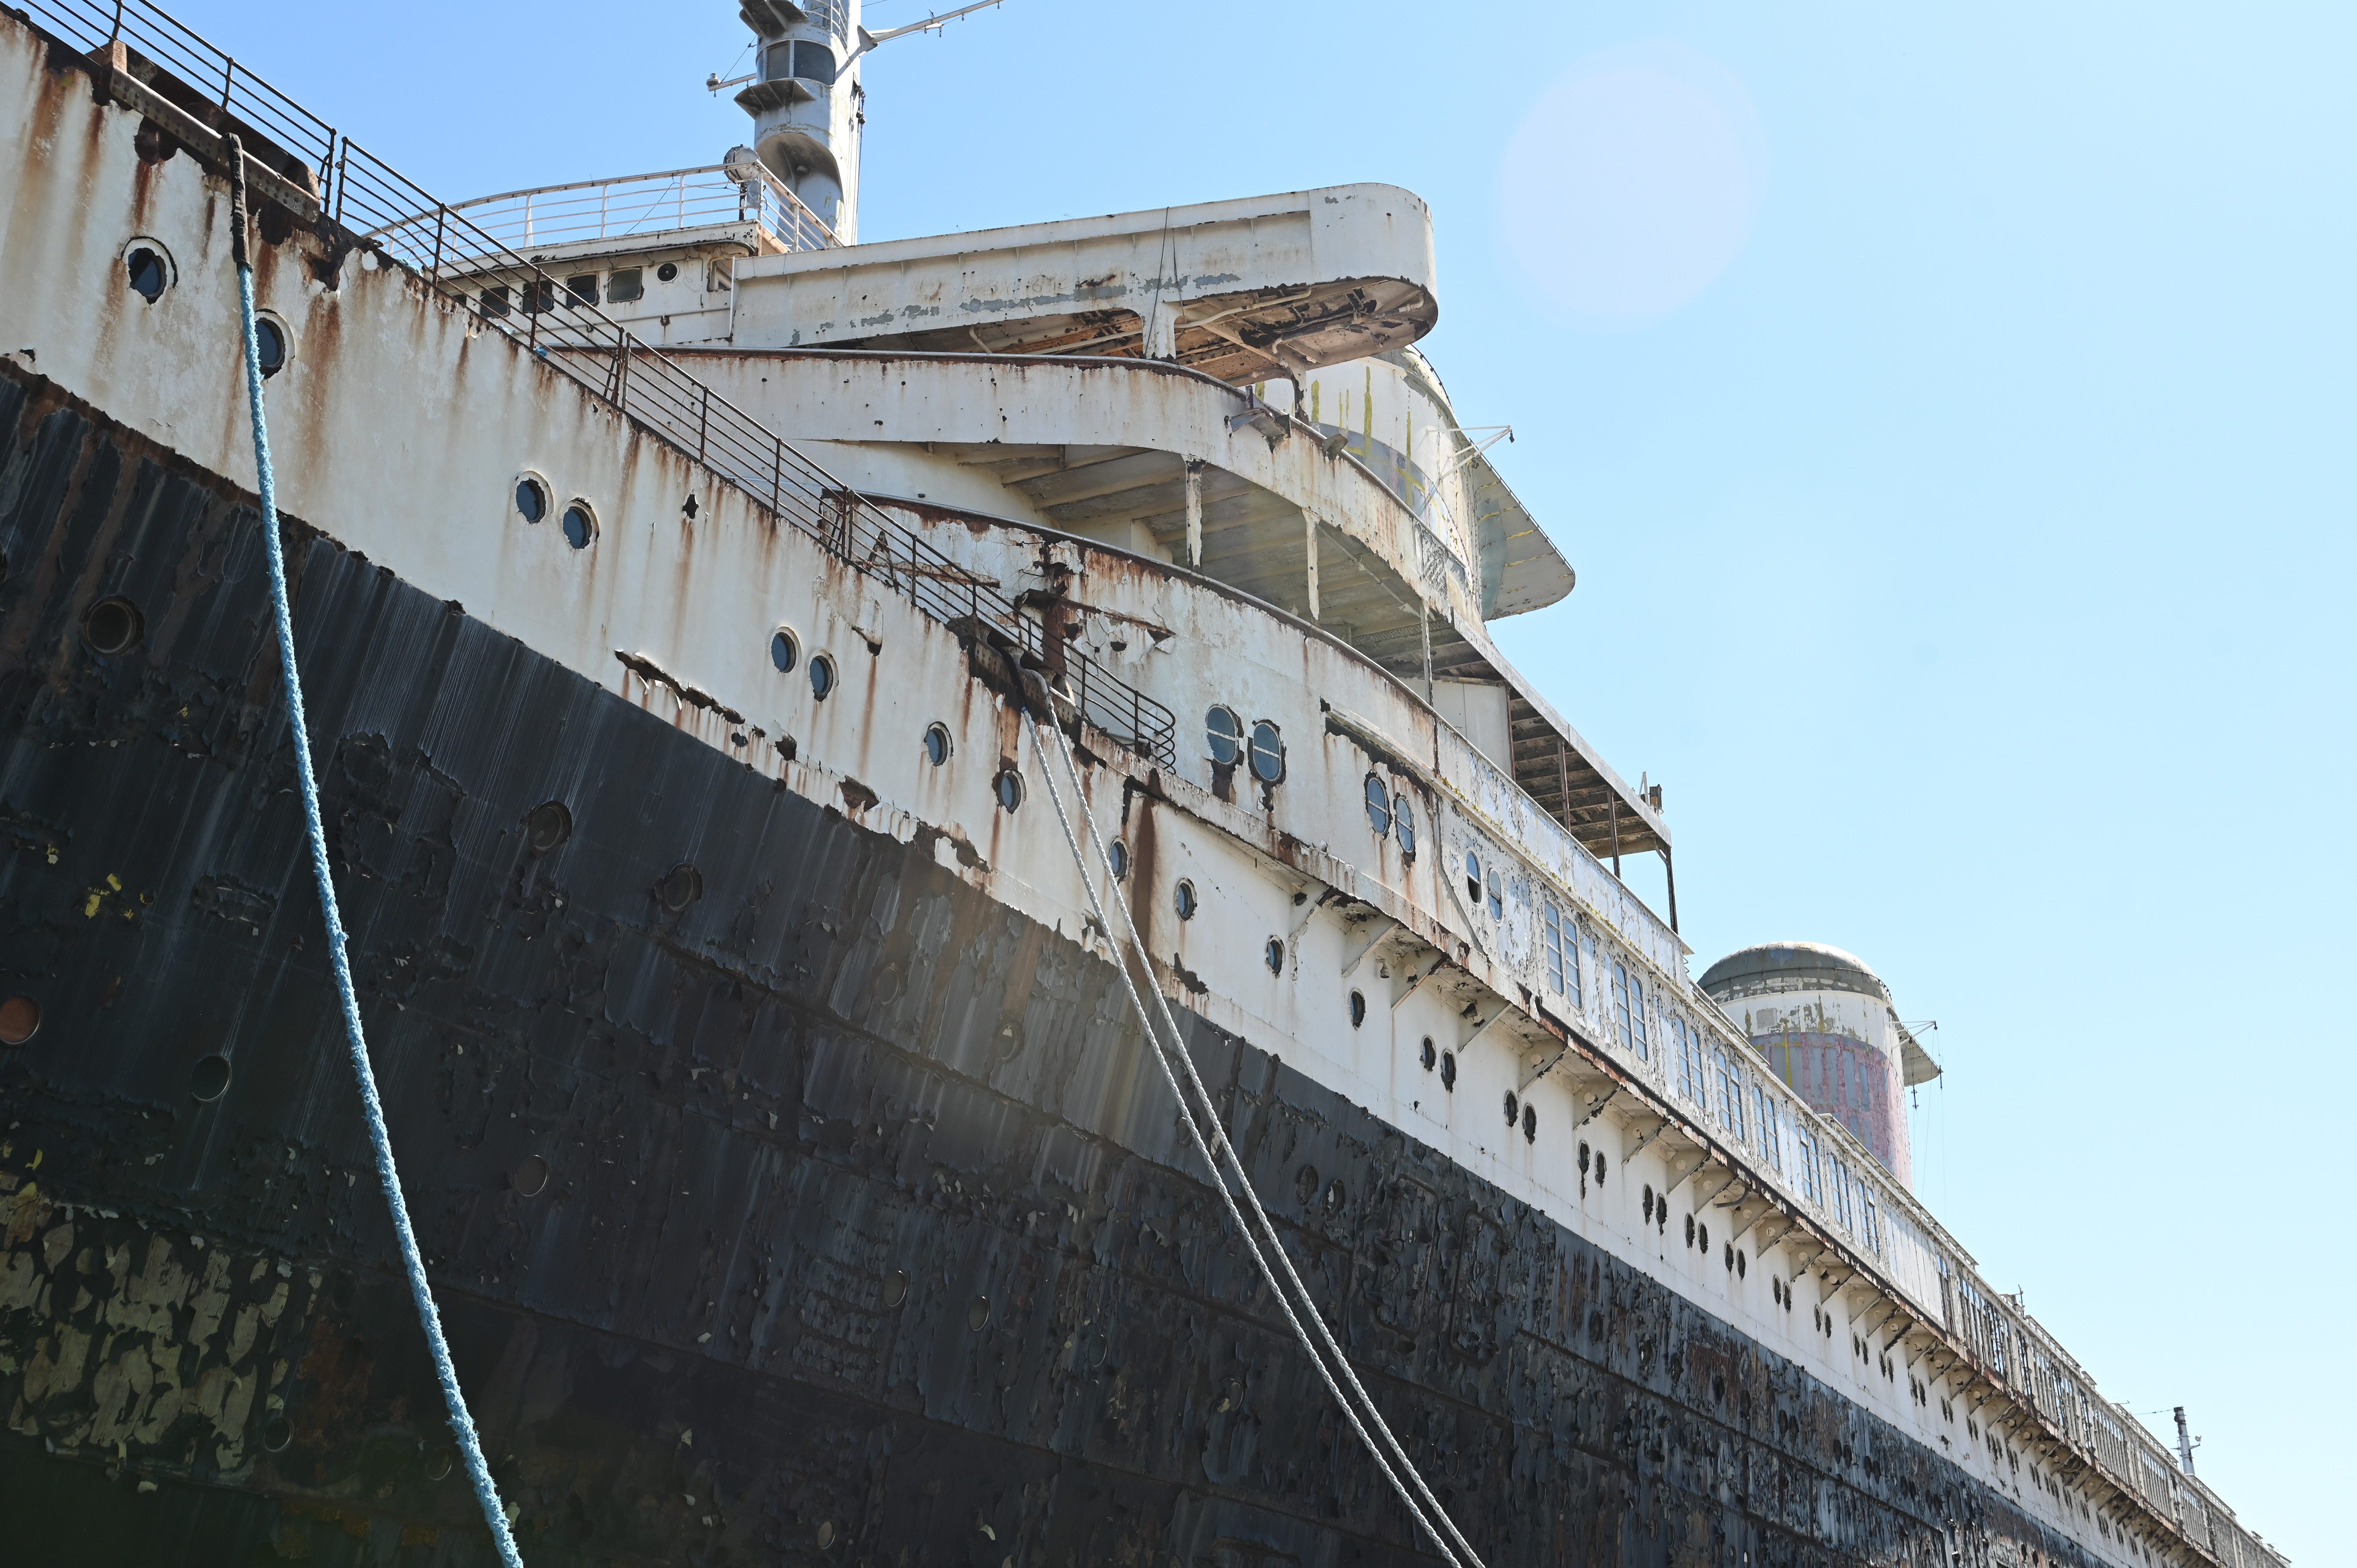 We wouldn’t topple the Statue of Liberty, so save the SS United States